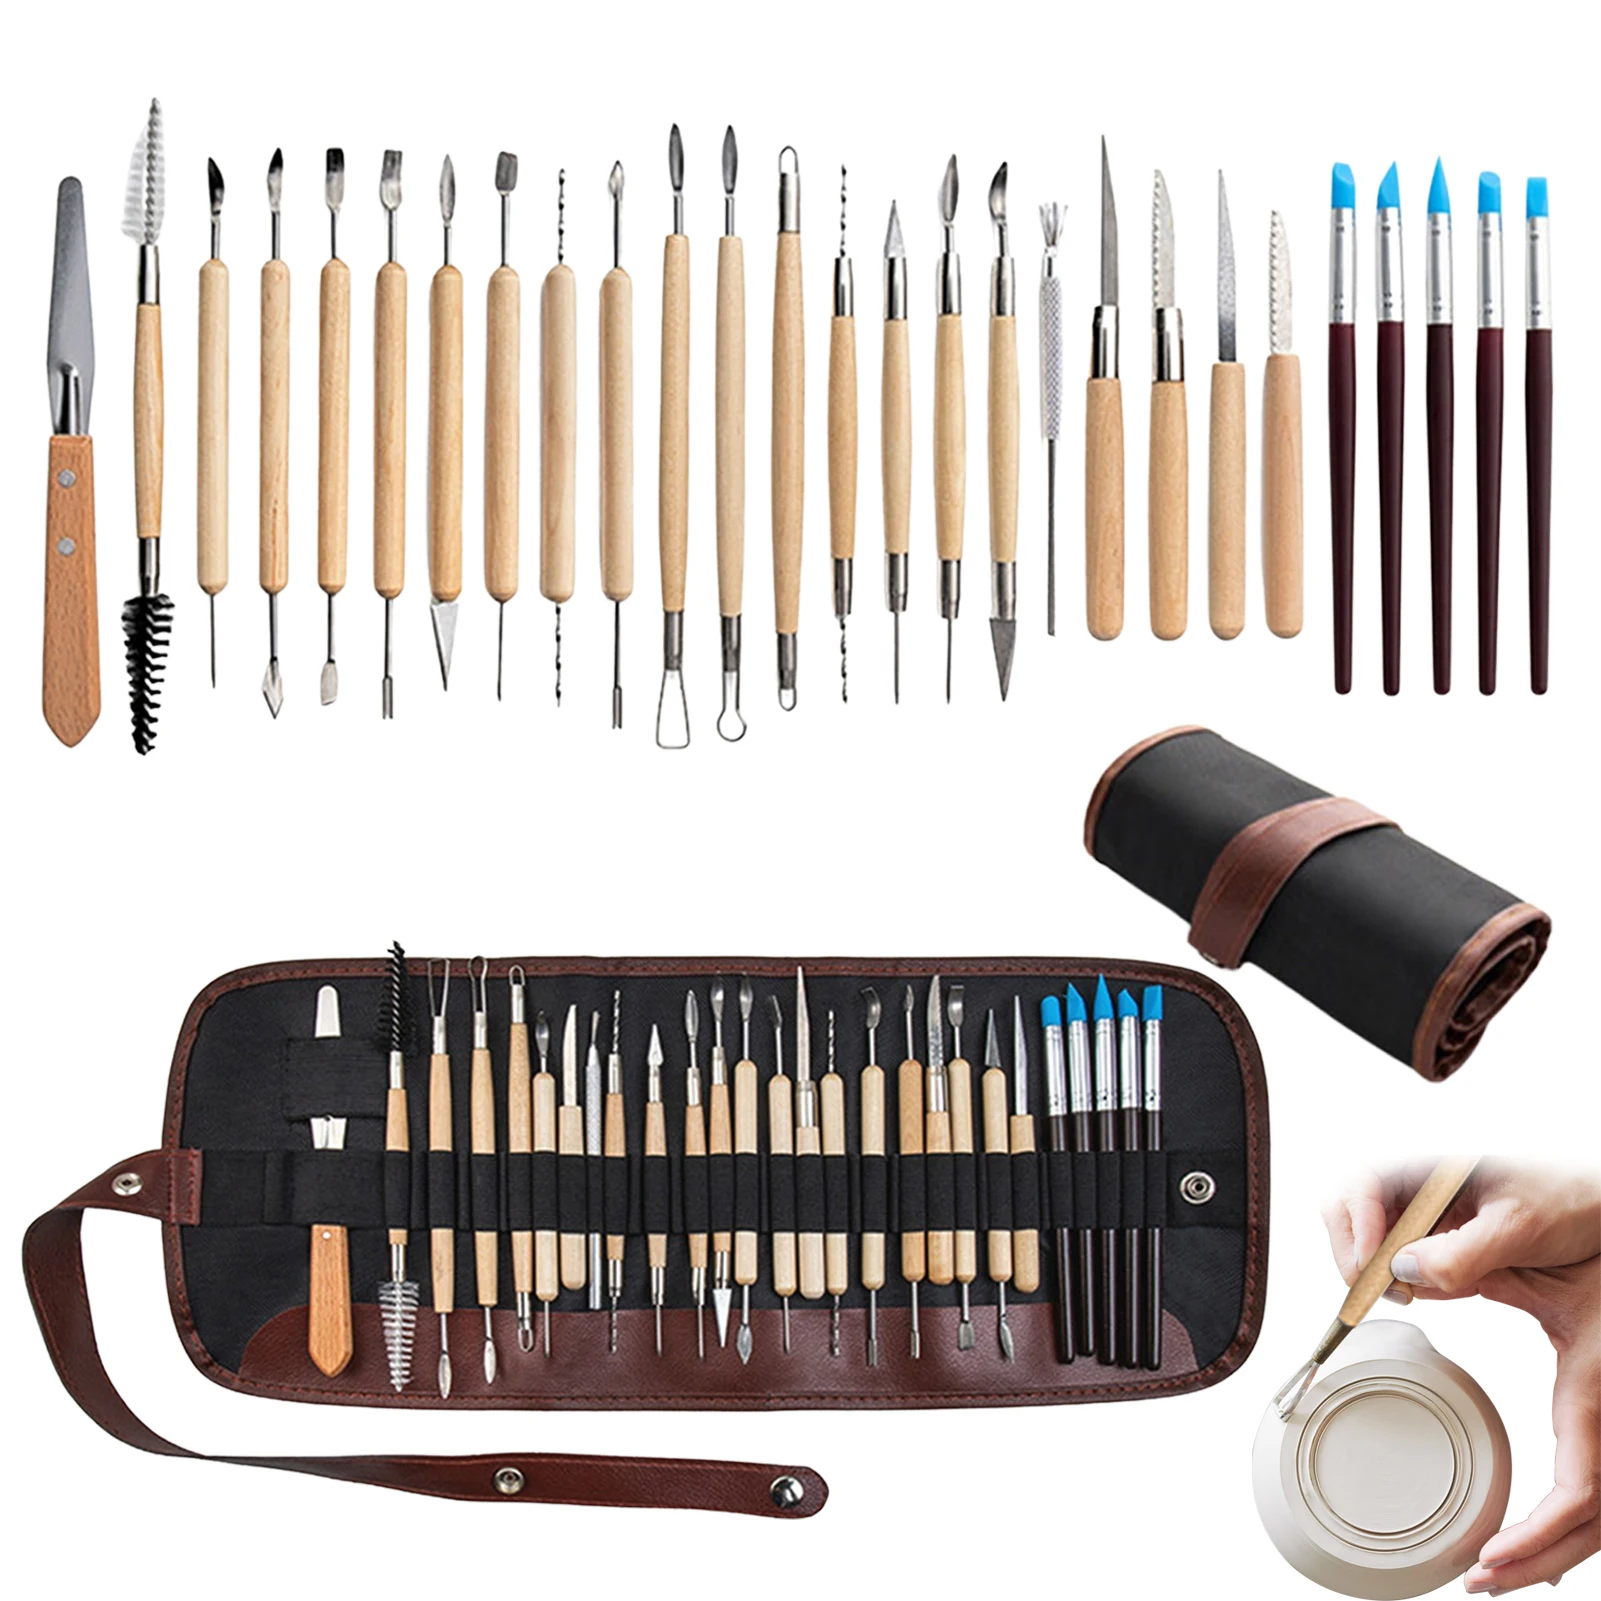 

DIY Ceramics Clay Sculpture Polymer Tool Set Beginner's Multi-tools Craft Sculpting Pottery Modeling Carving Smoothing Clay Kit